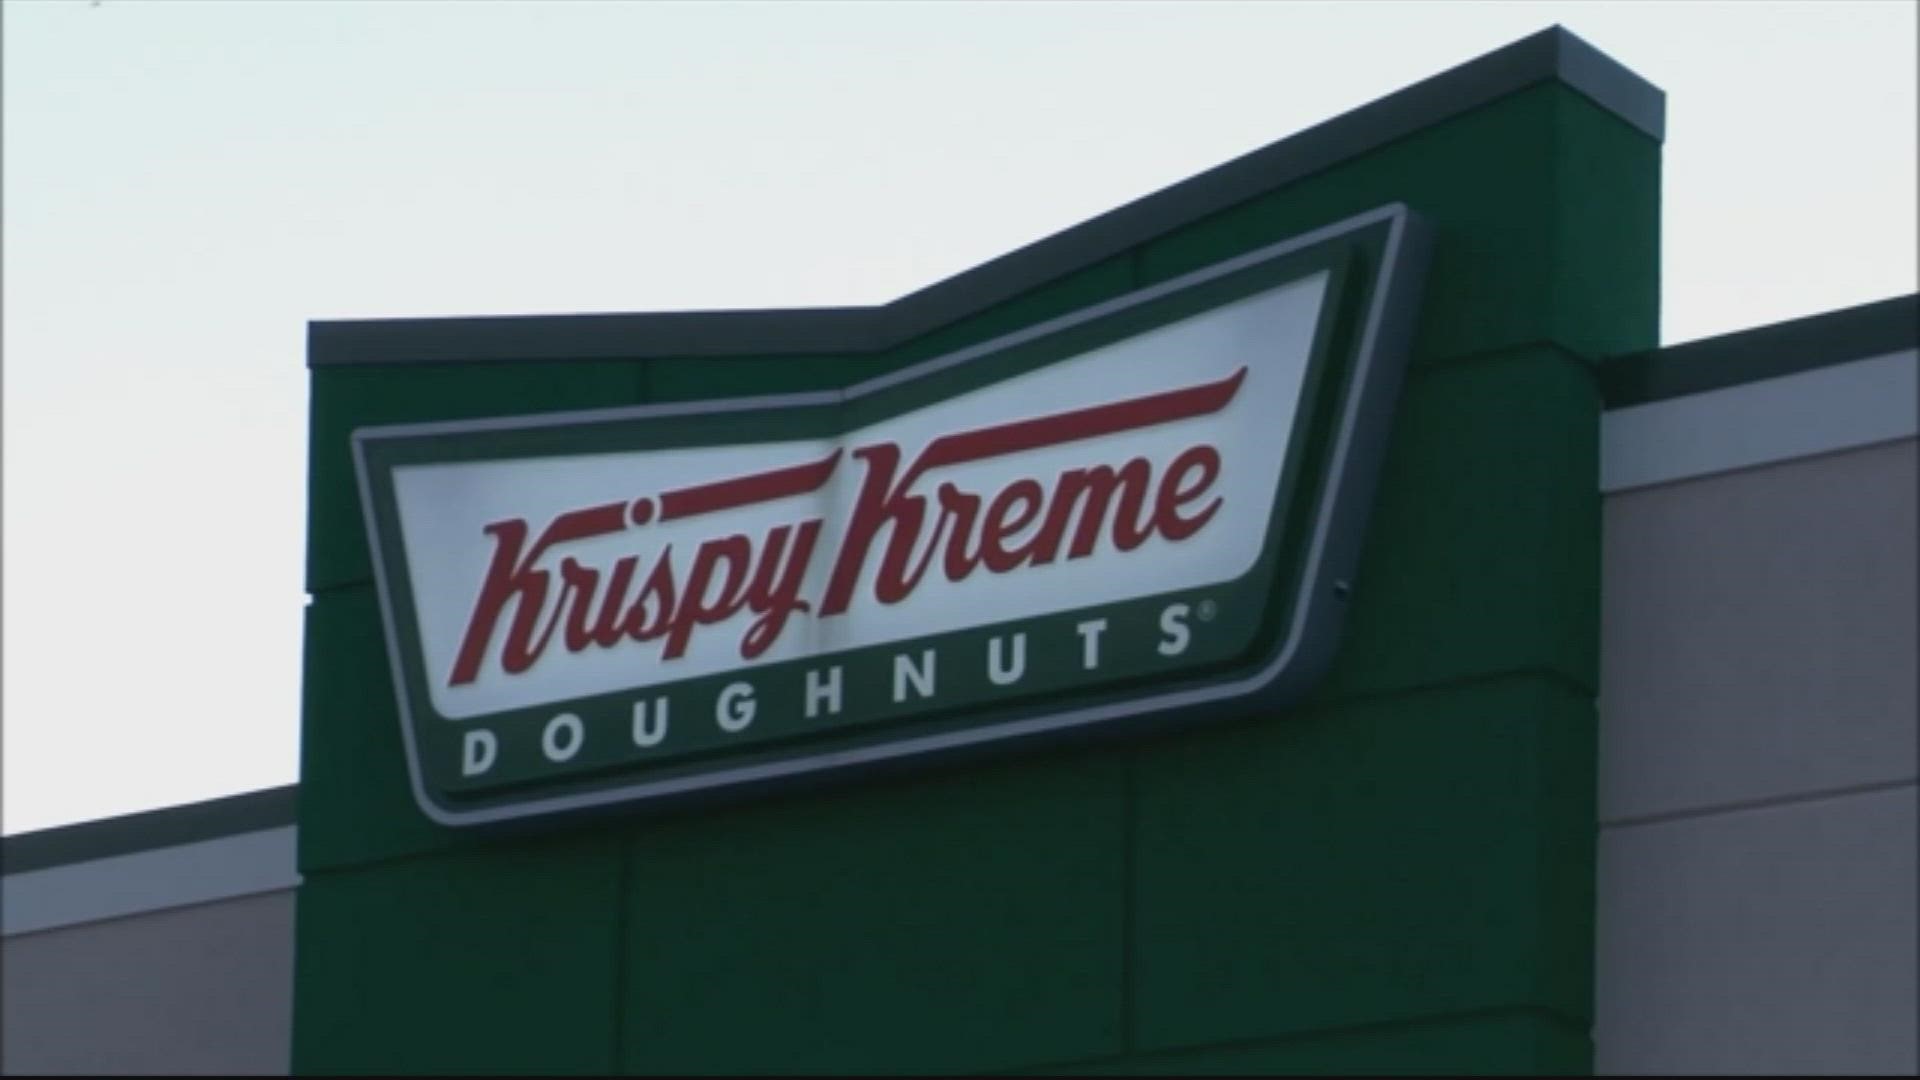 In honor of National Dog Day on Aug. 26, Krispy Kreme will sell limited-time baked treats for your four-legged friends.